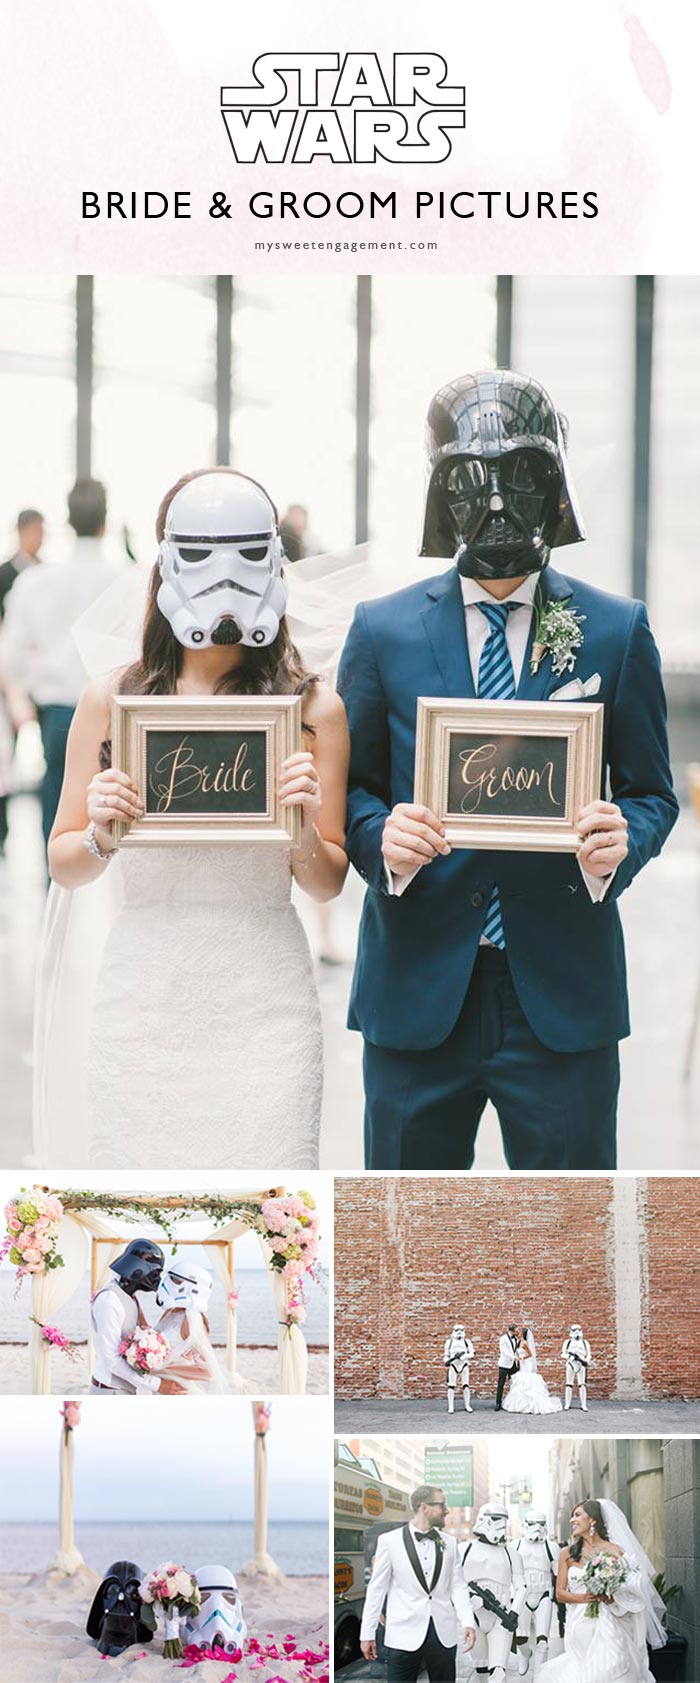 Bride and Groom photo ideas with Stormtrooper and Darth Vader helmets - even on the beach! What about this awesome Bride and Groom with Stormtroopers? Love it! // You're gonna love this Ultimate Guide for an Epic and Elegant Star Wars Wedding. // https://mysweetengagement.com